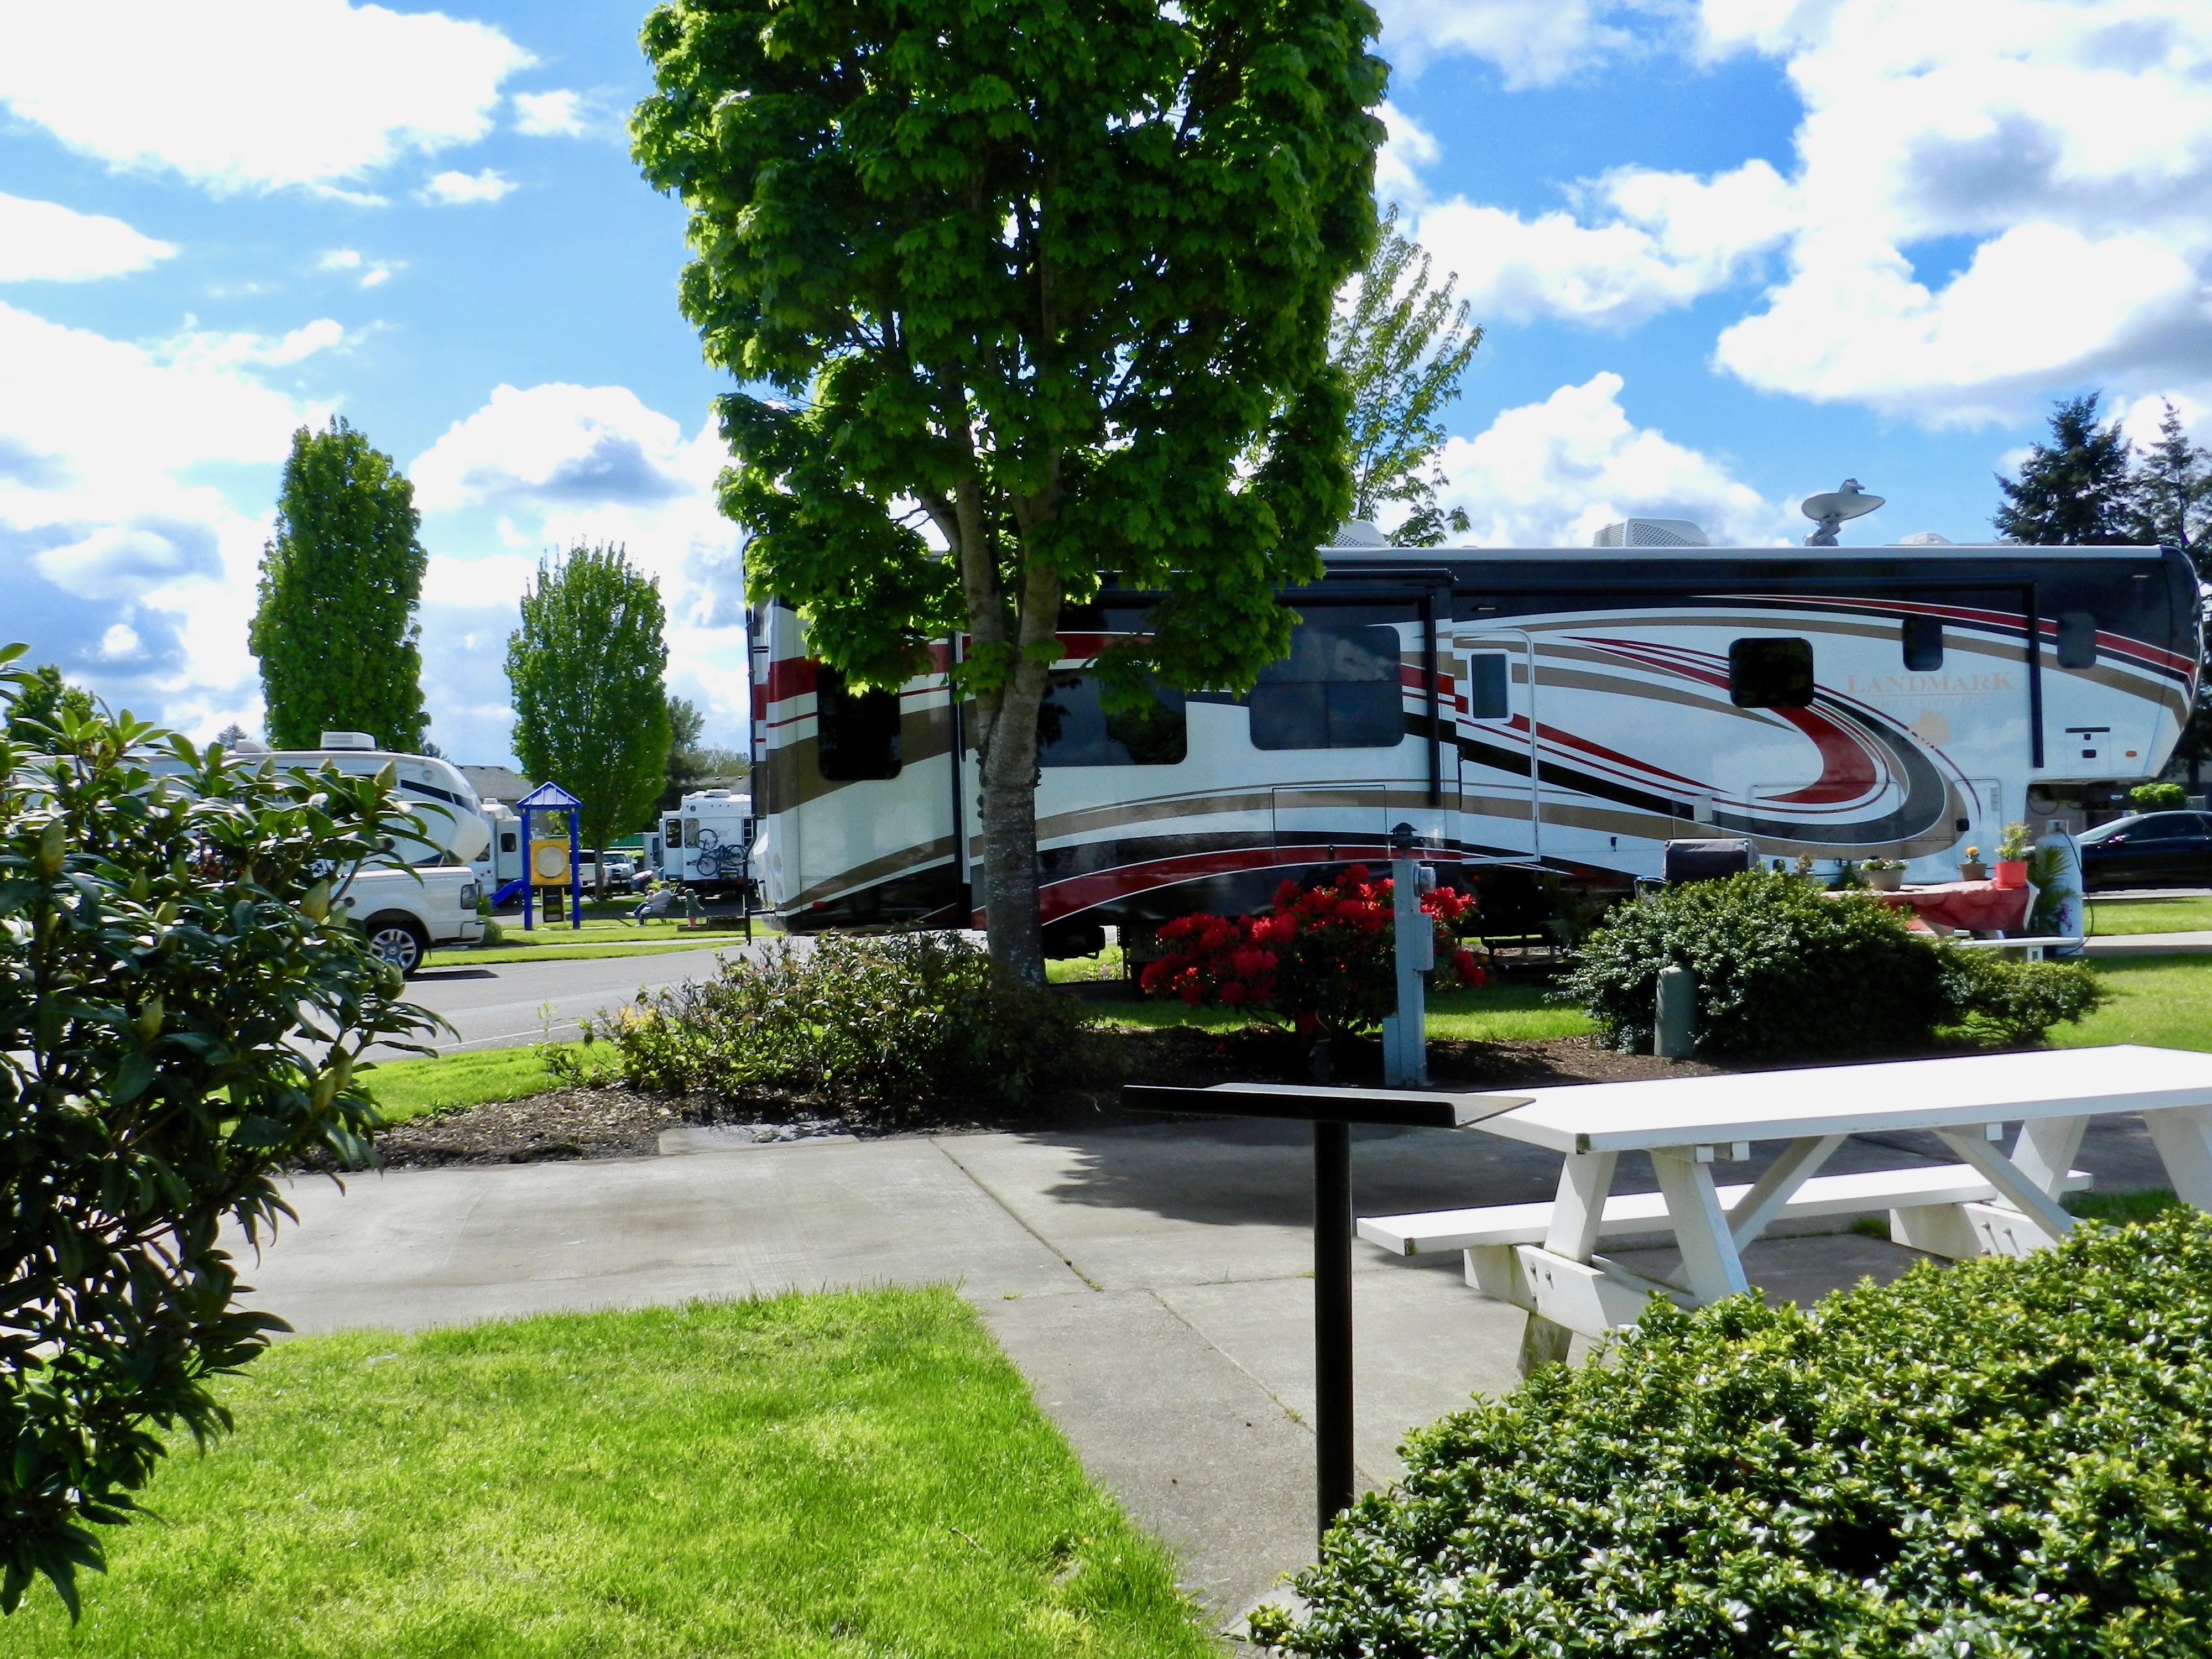 Top-Rated Phoenix RV Park Now Offers Covered RV Storage | Good Sam